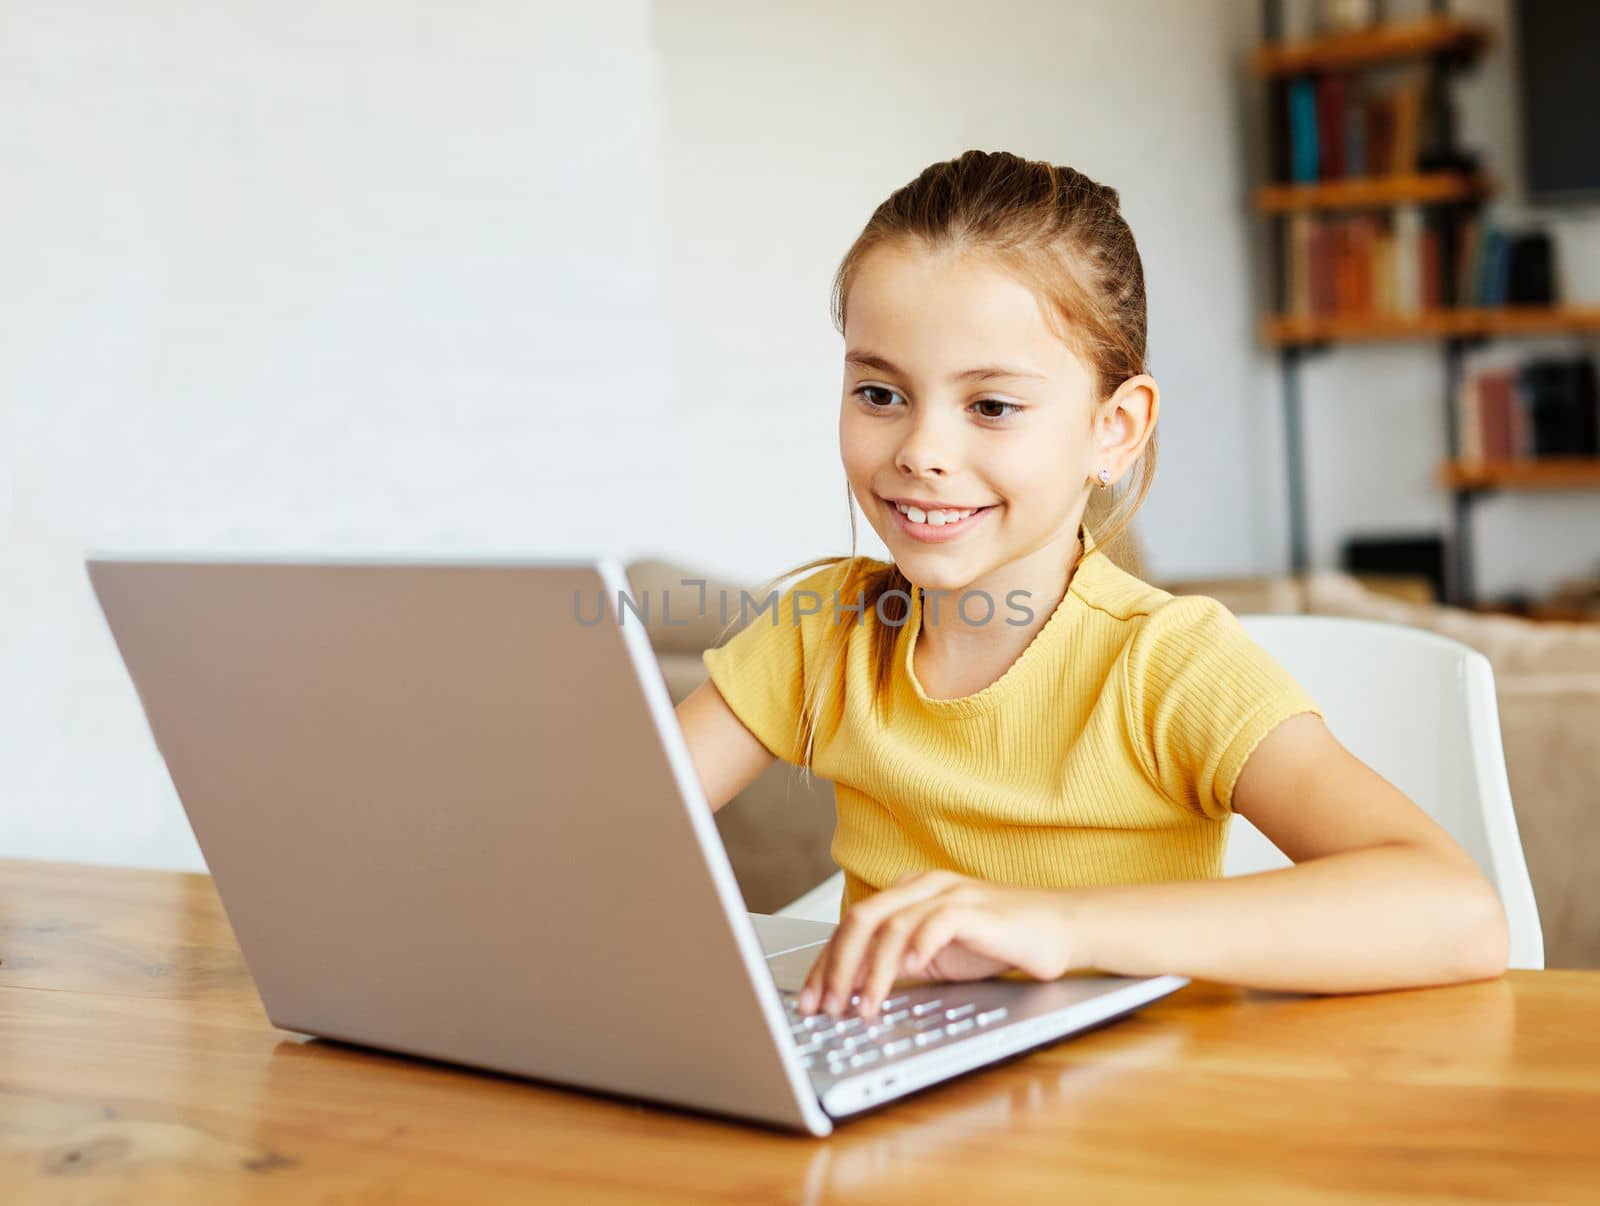 child laptop computer technology home girl education homework kid learning internet childhood student sitting connection using online by Picsfive